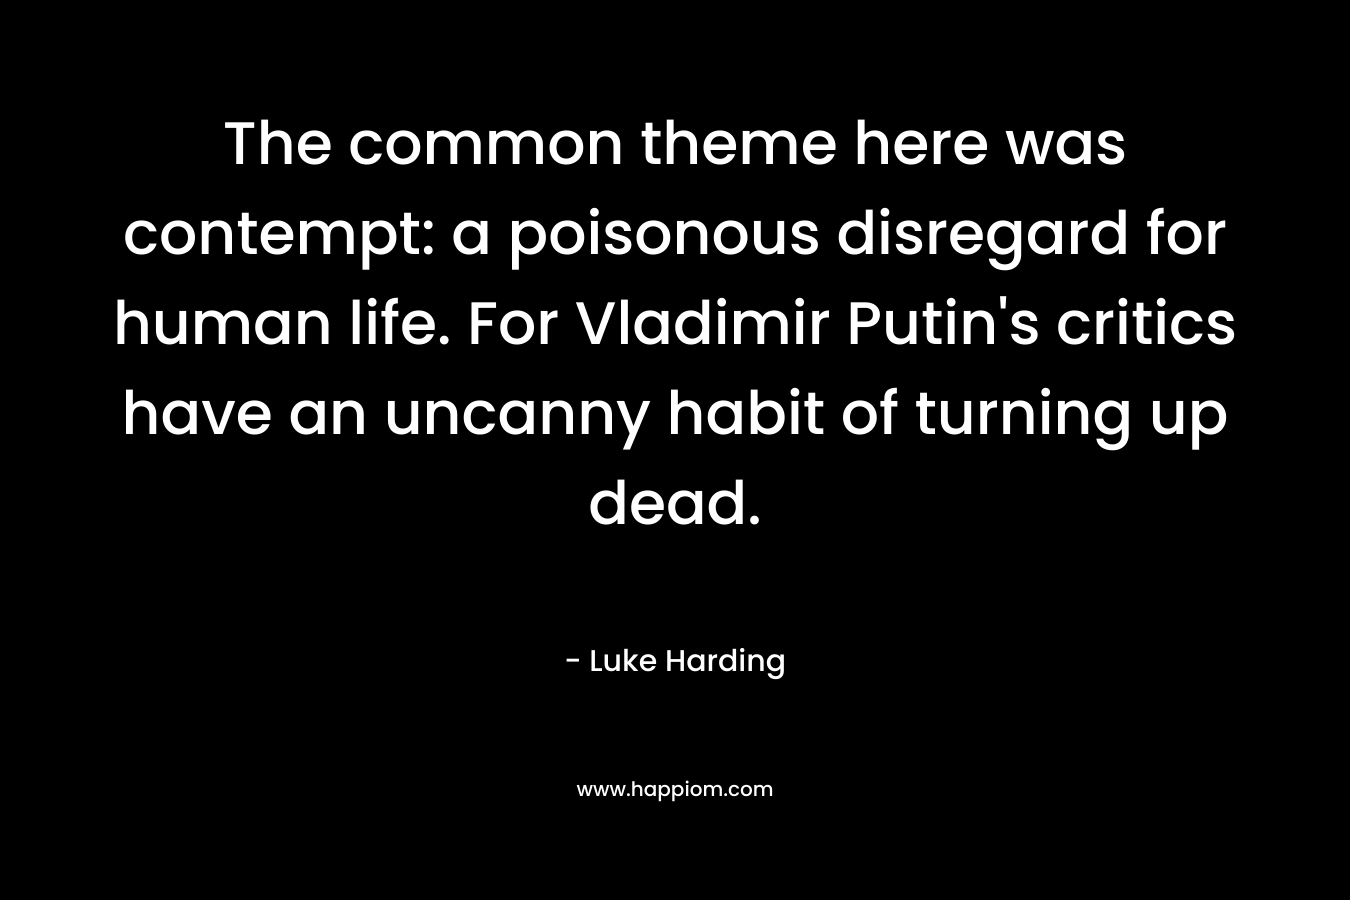 The common theme here was contempt: a poisonous disregard for human life. For Vladimir Putin's critics have an uncanny habit of turning up dead.